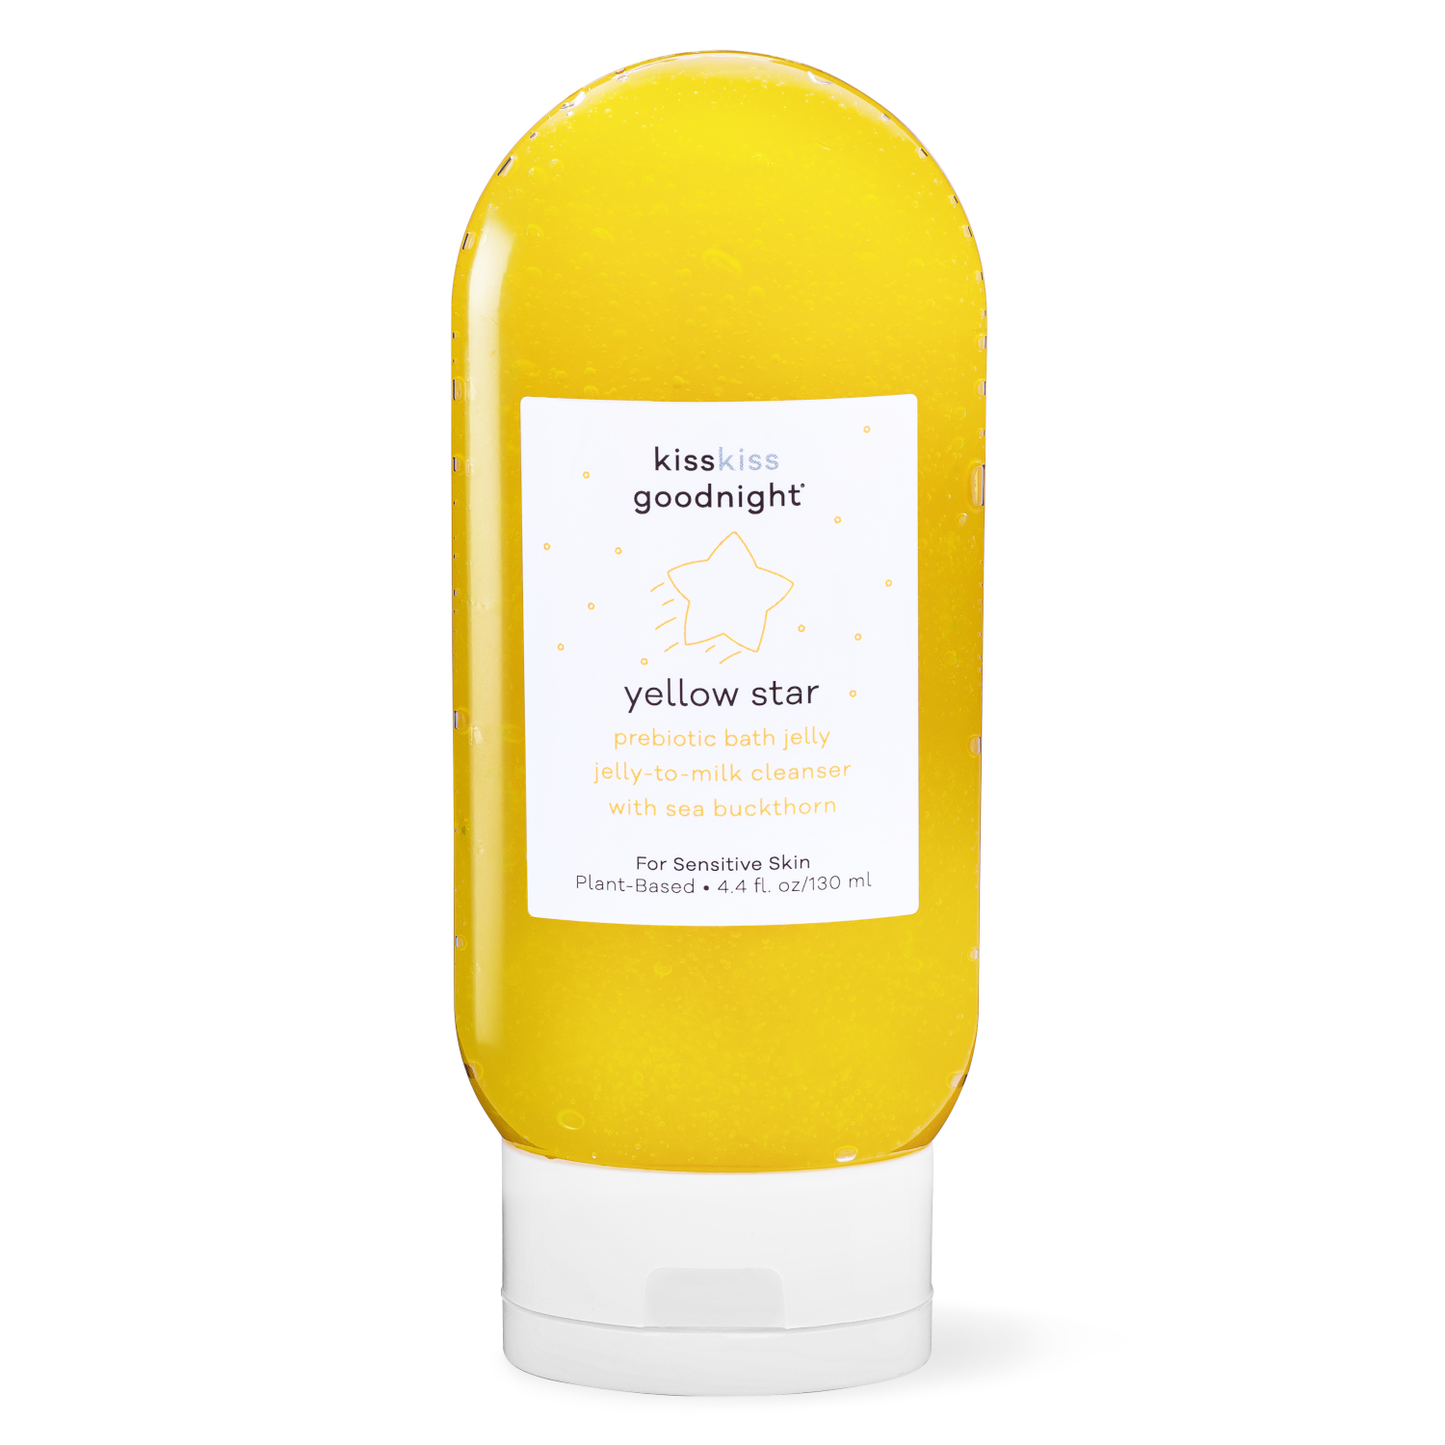 YELLOW STAR PREBIOTIC JELLY-TO-MILK CLEANSER